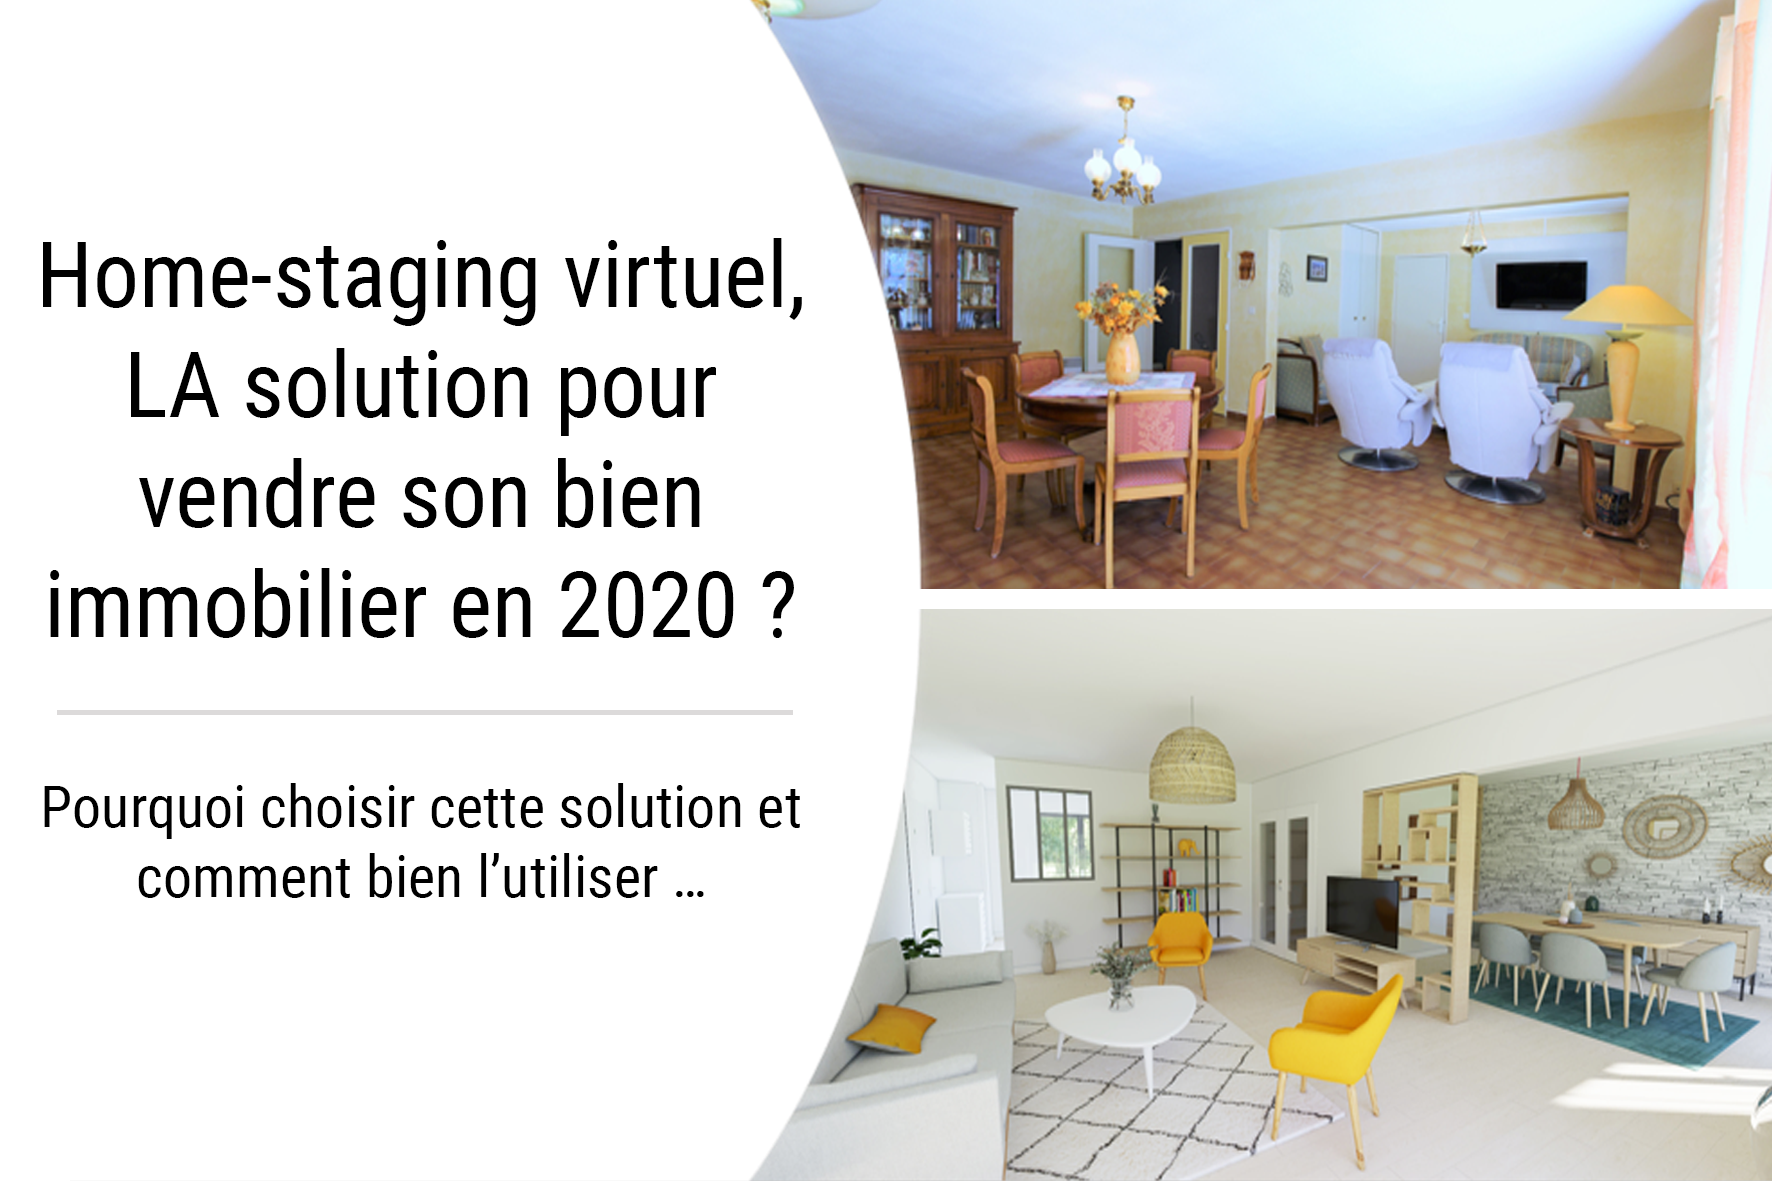 Home-staging virtuel